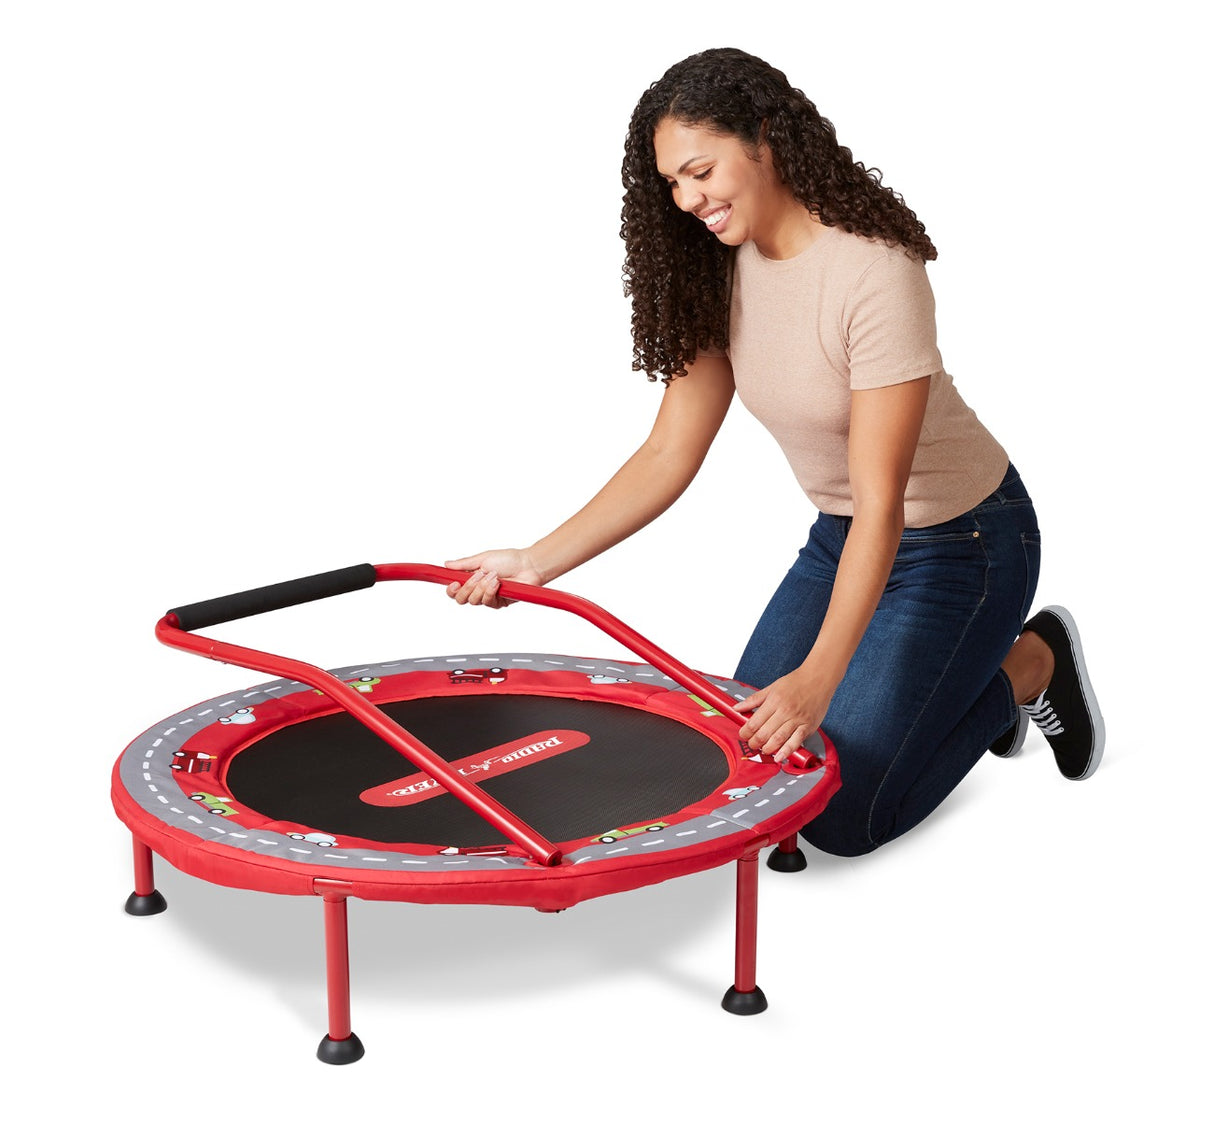 2-in-1 Kids' Trampoline Easy to fold and store